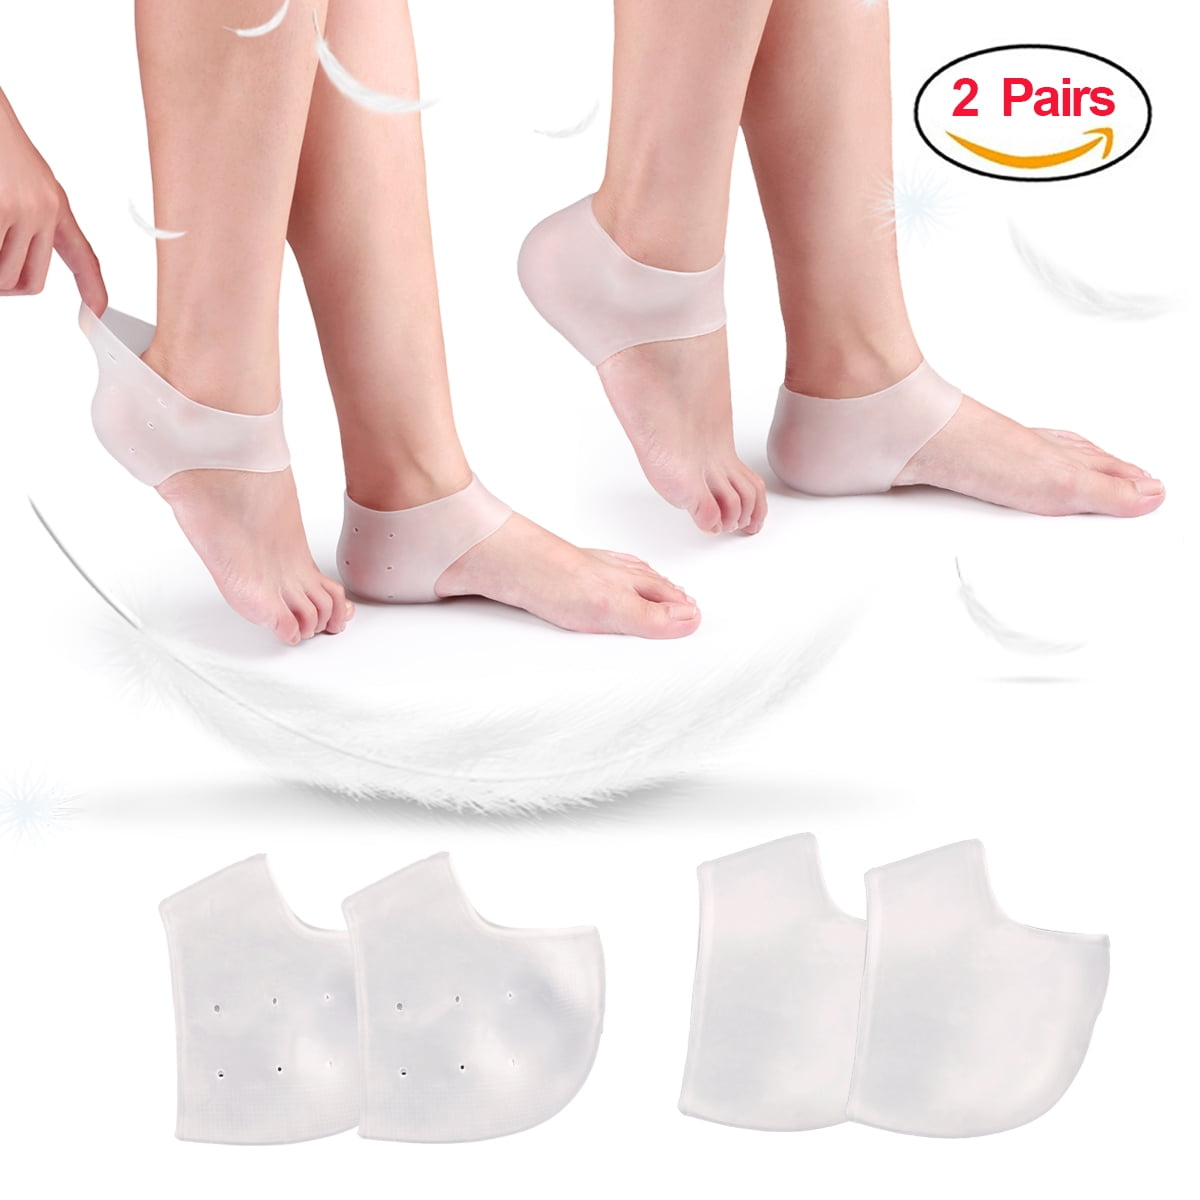 2X Cushioned Achy Support Feet Pain Shock Agony Relief Absorbing Insole Heel Pad 